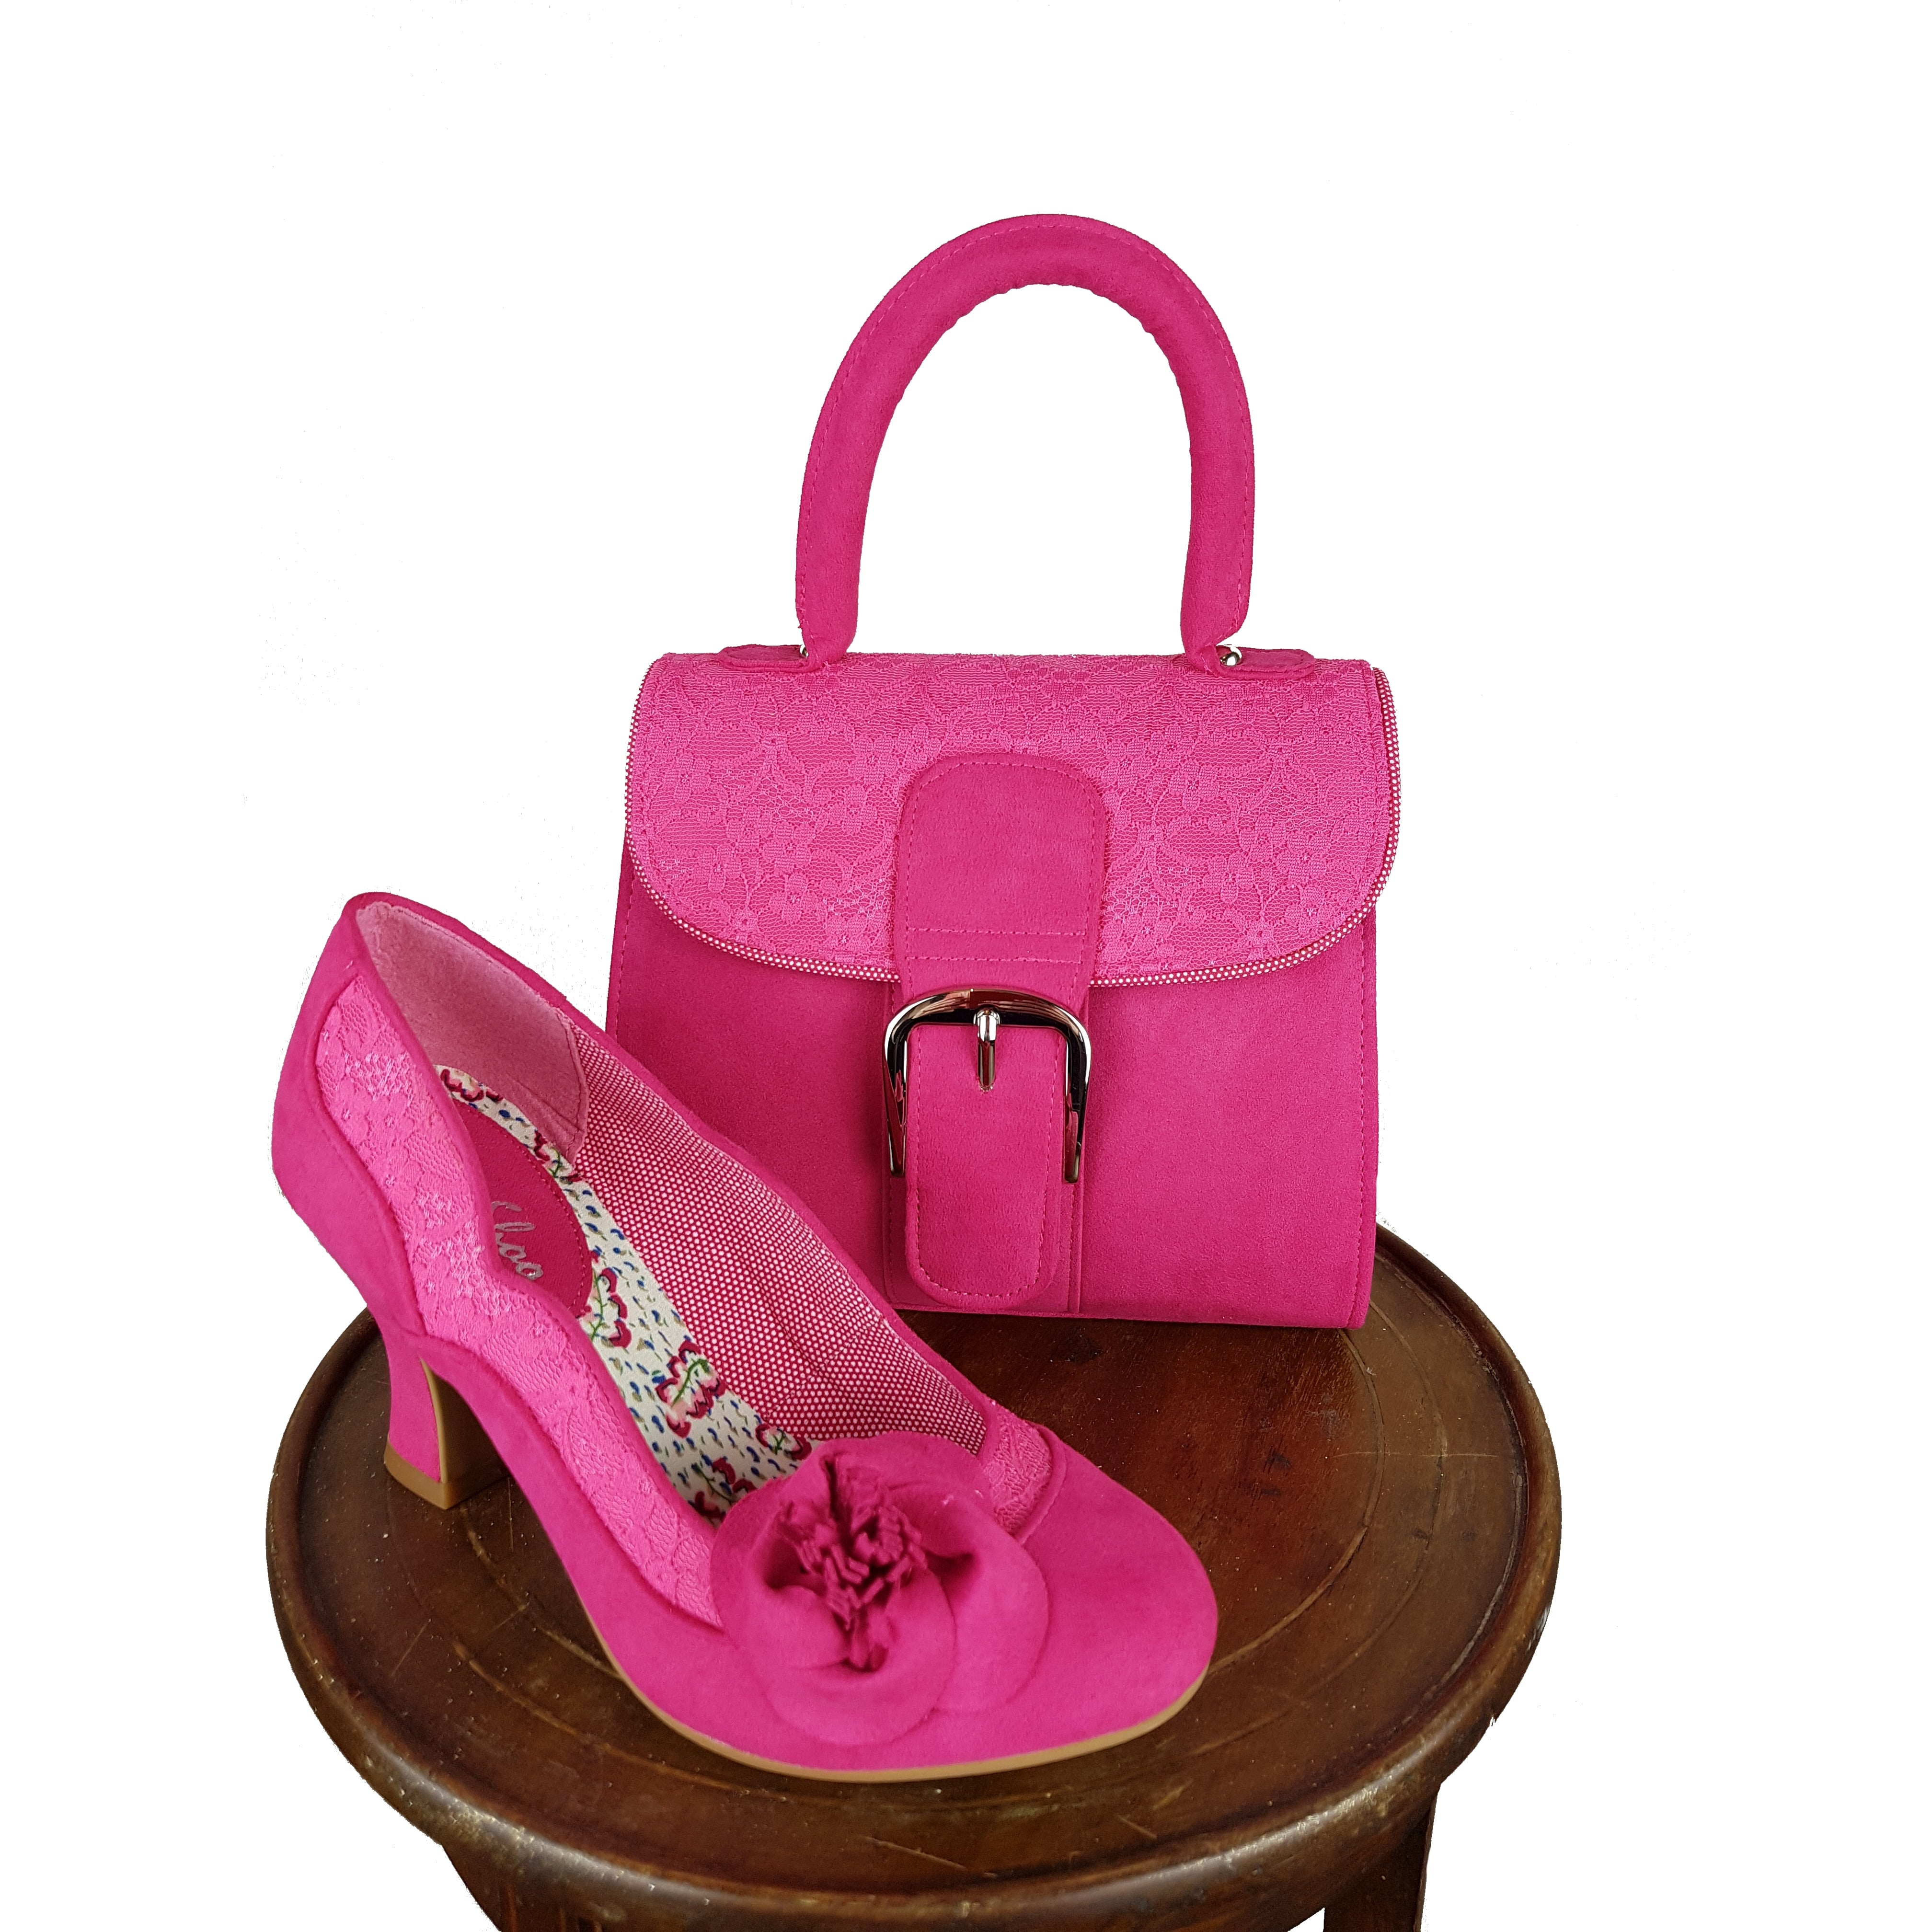 fuschia pink shoes and bag for wedding